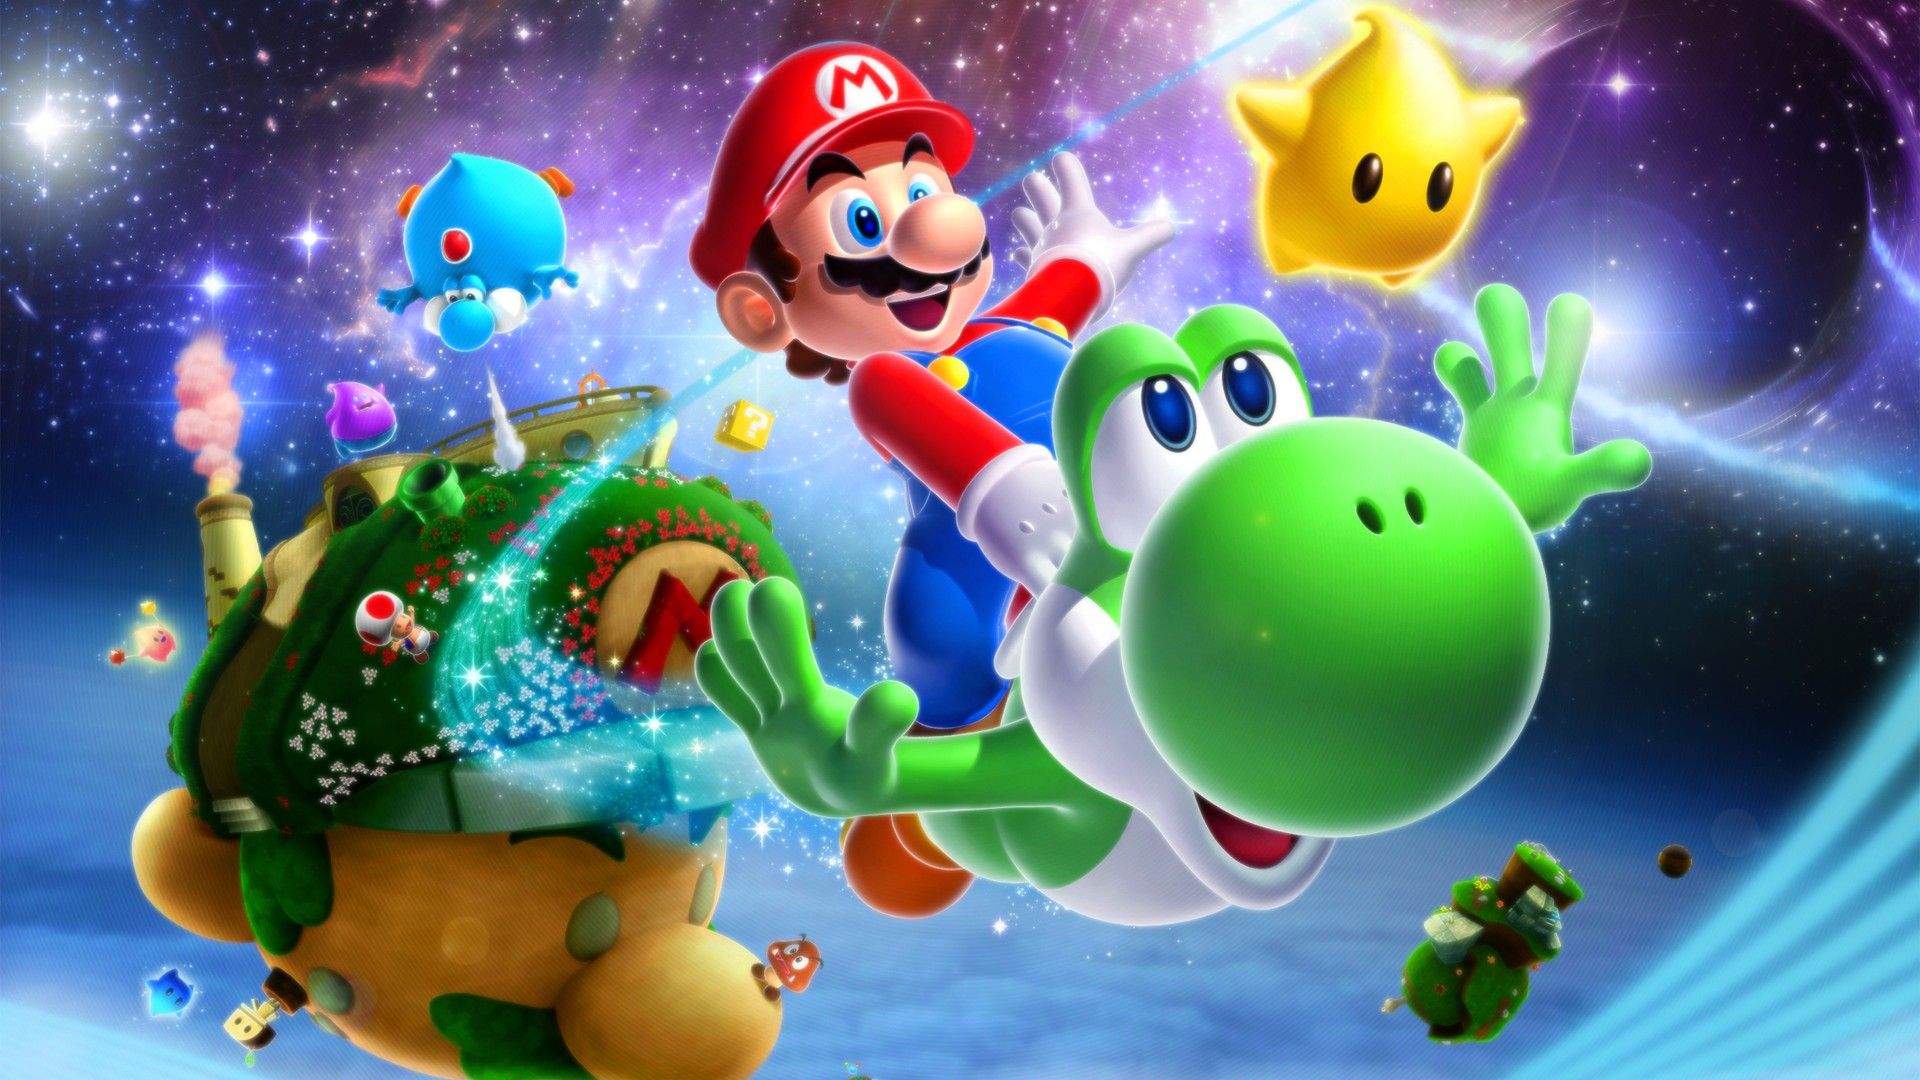 Mario and Yoshi flying through space in Super Mario Galaxy, one of the best games for the Wii. - 